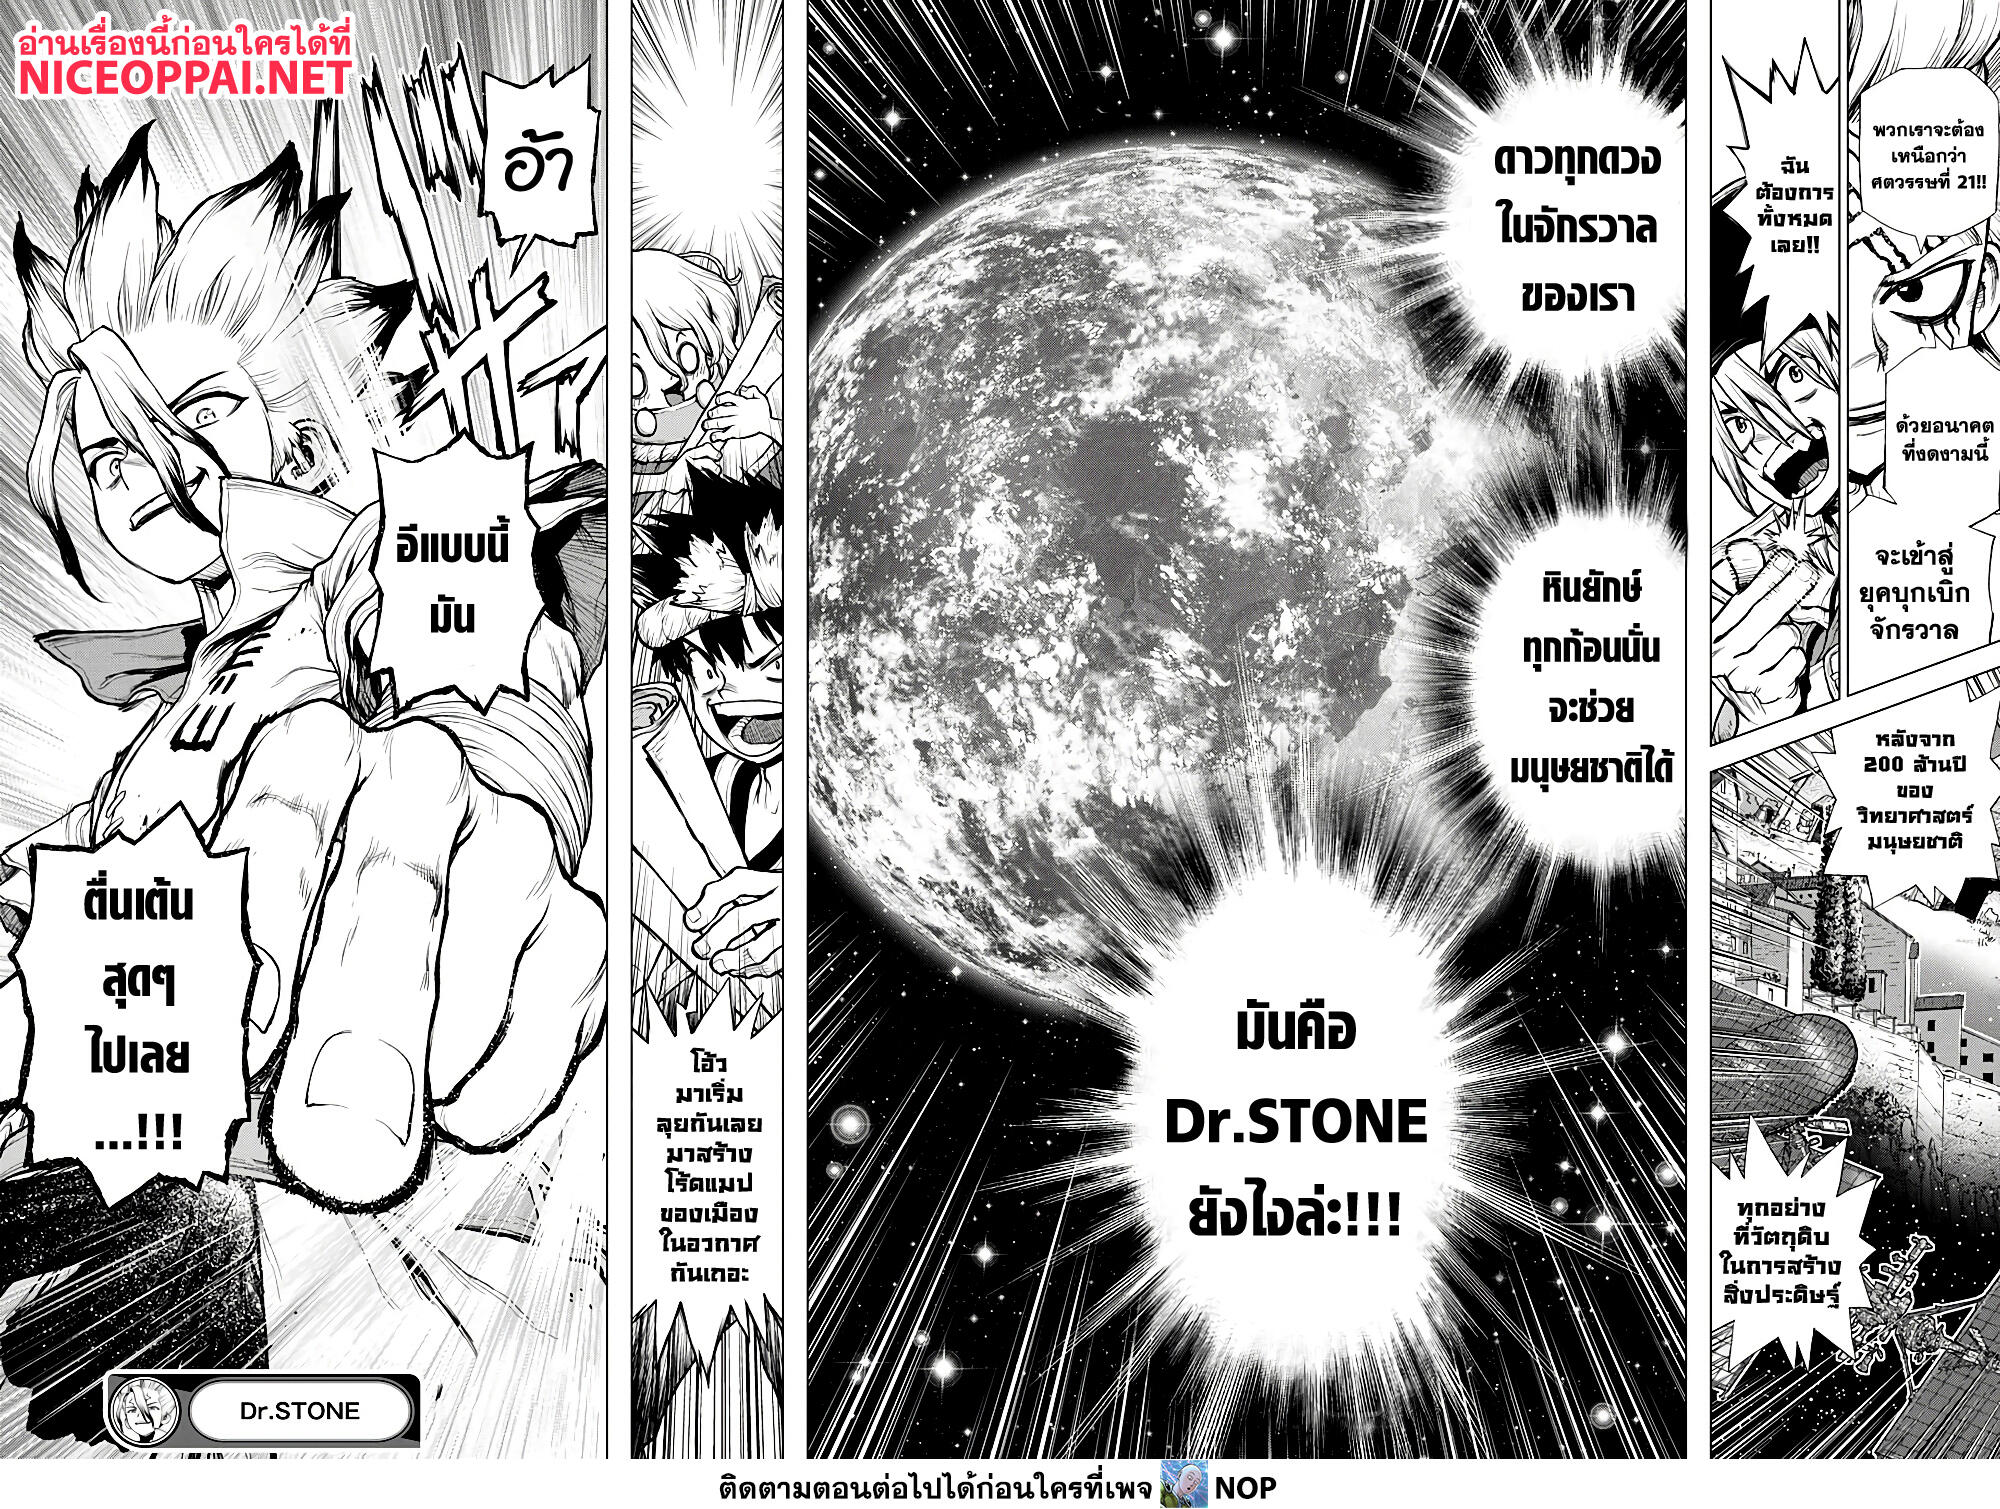 Dr. Stone 232.1 TH